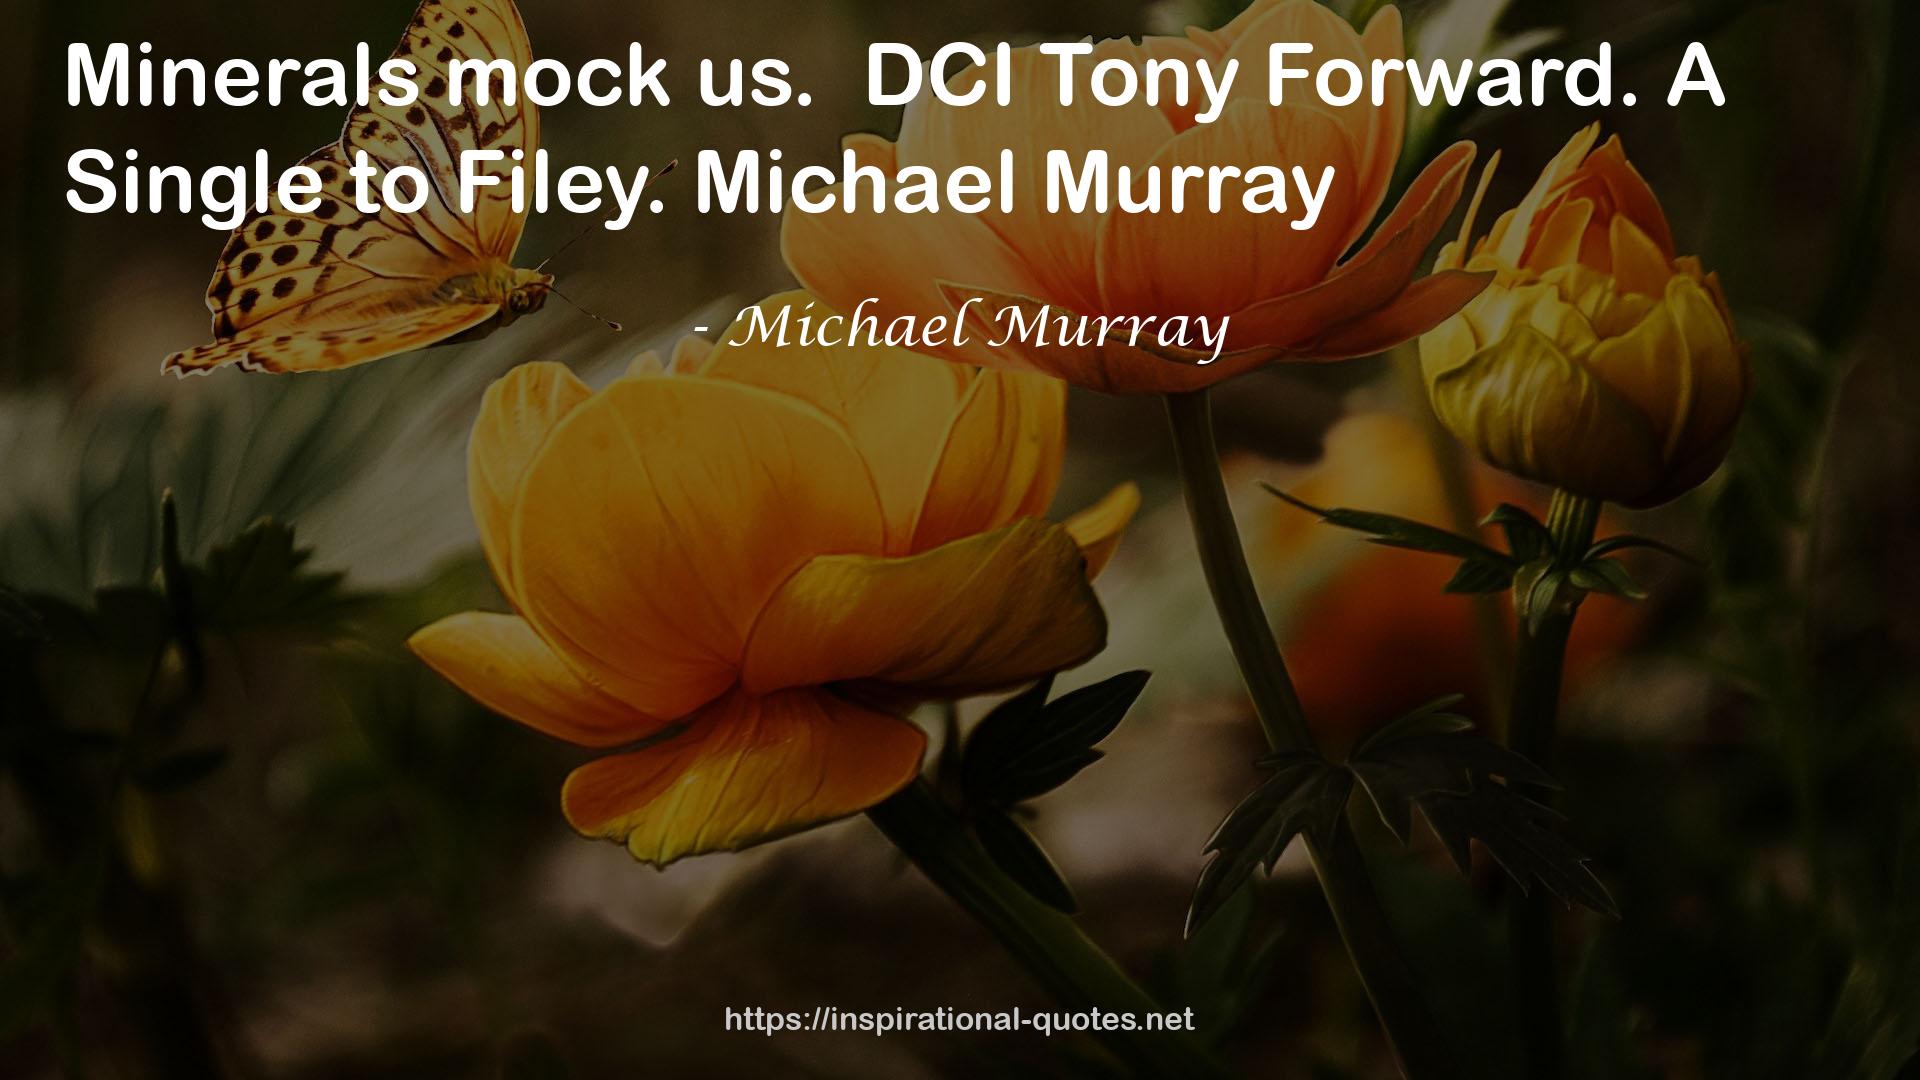 Michael Murray QUOTES